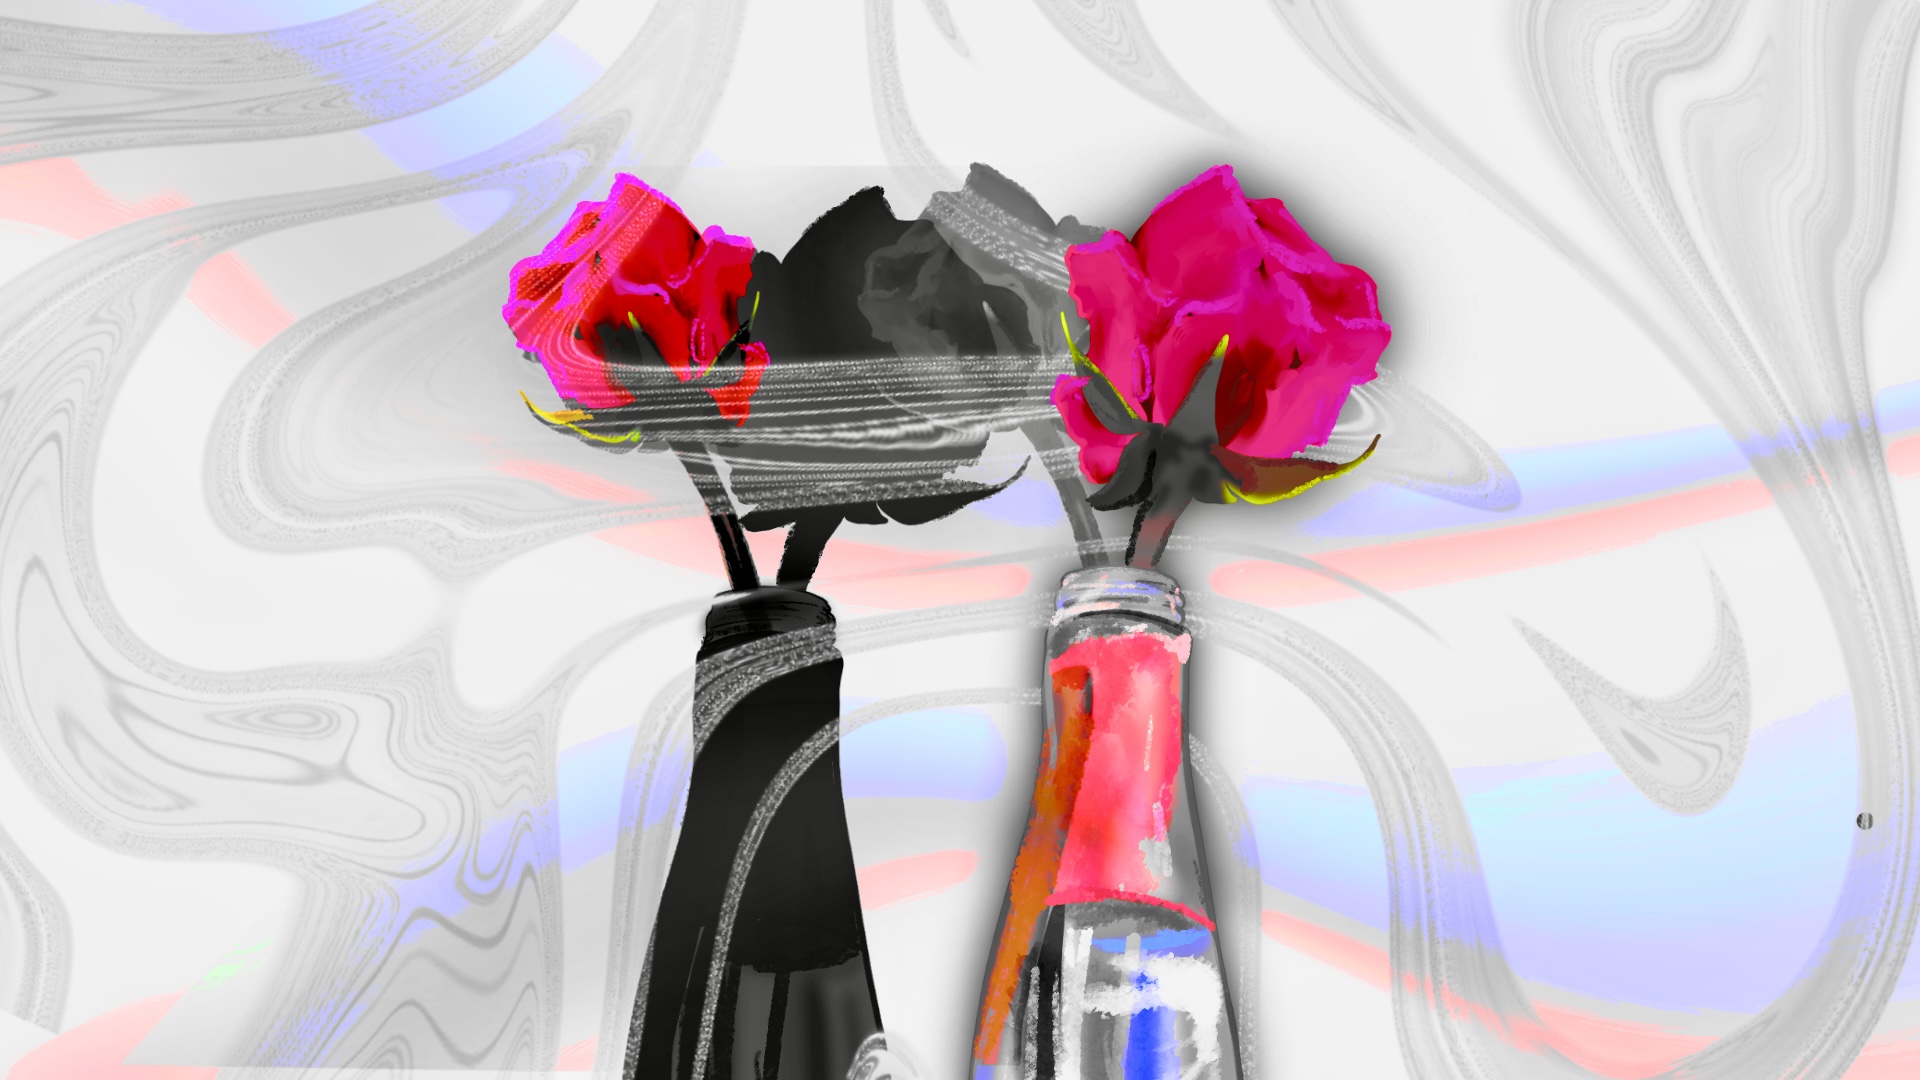 image of roses in vases